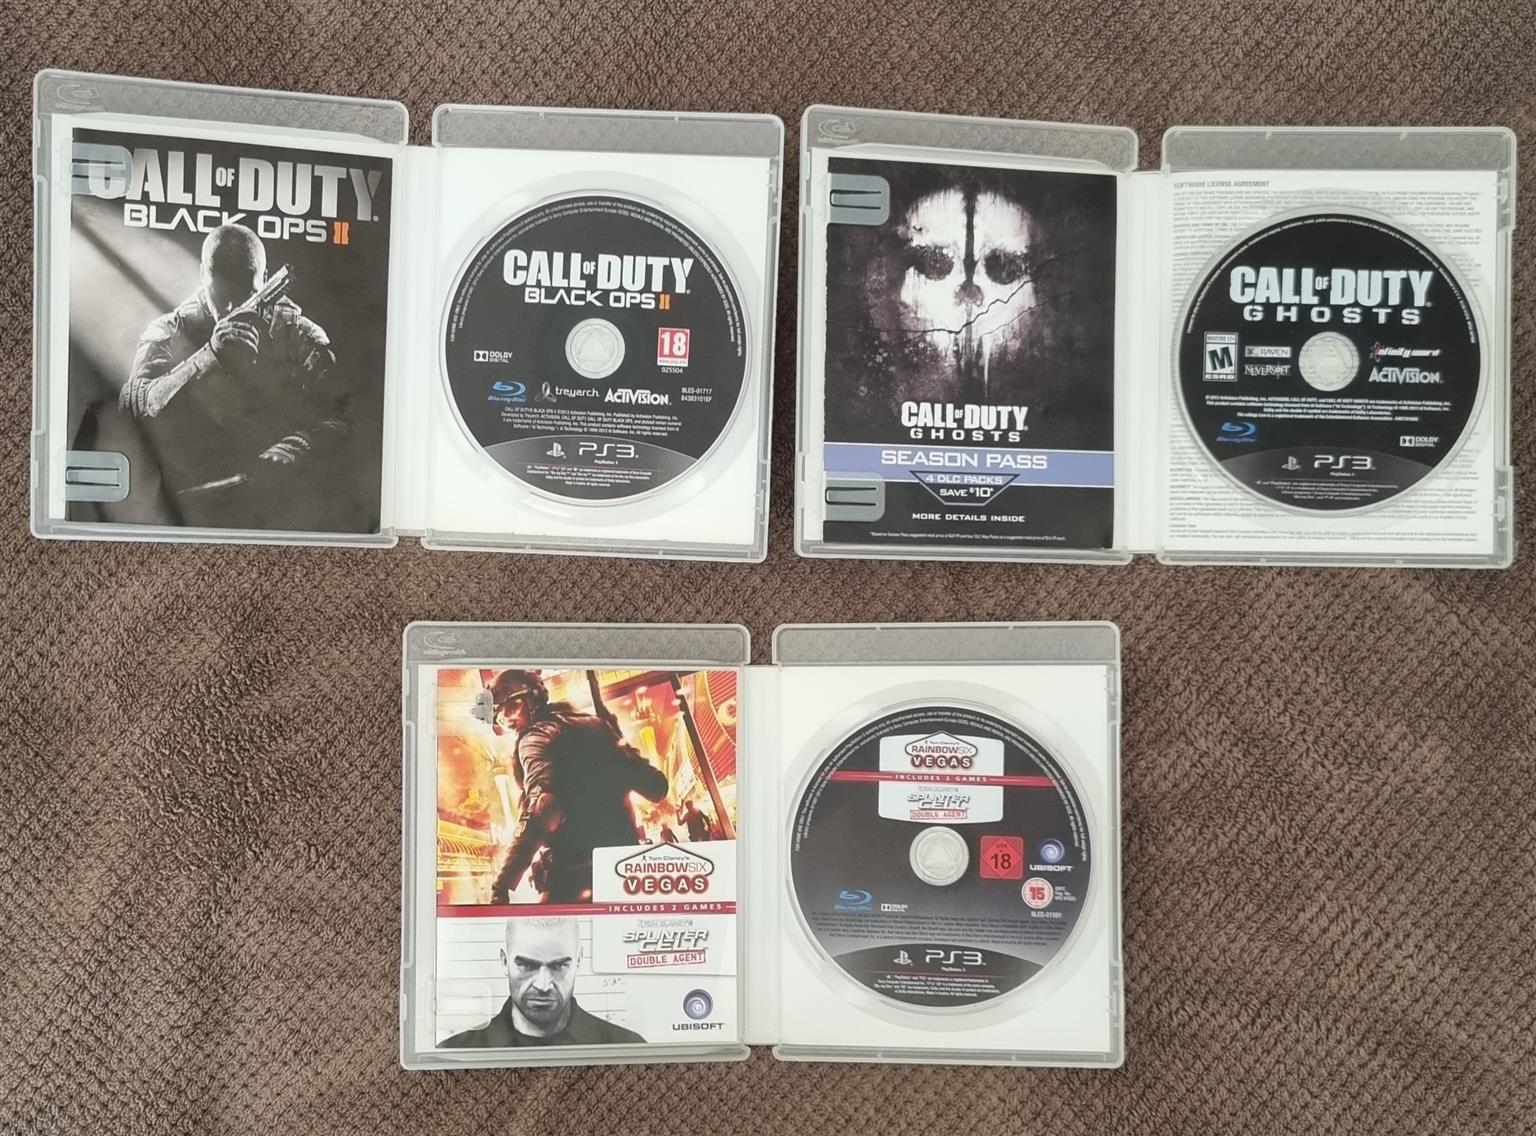 PS3 Games - Call of Duty and Tom Clancy Titles 